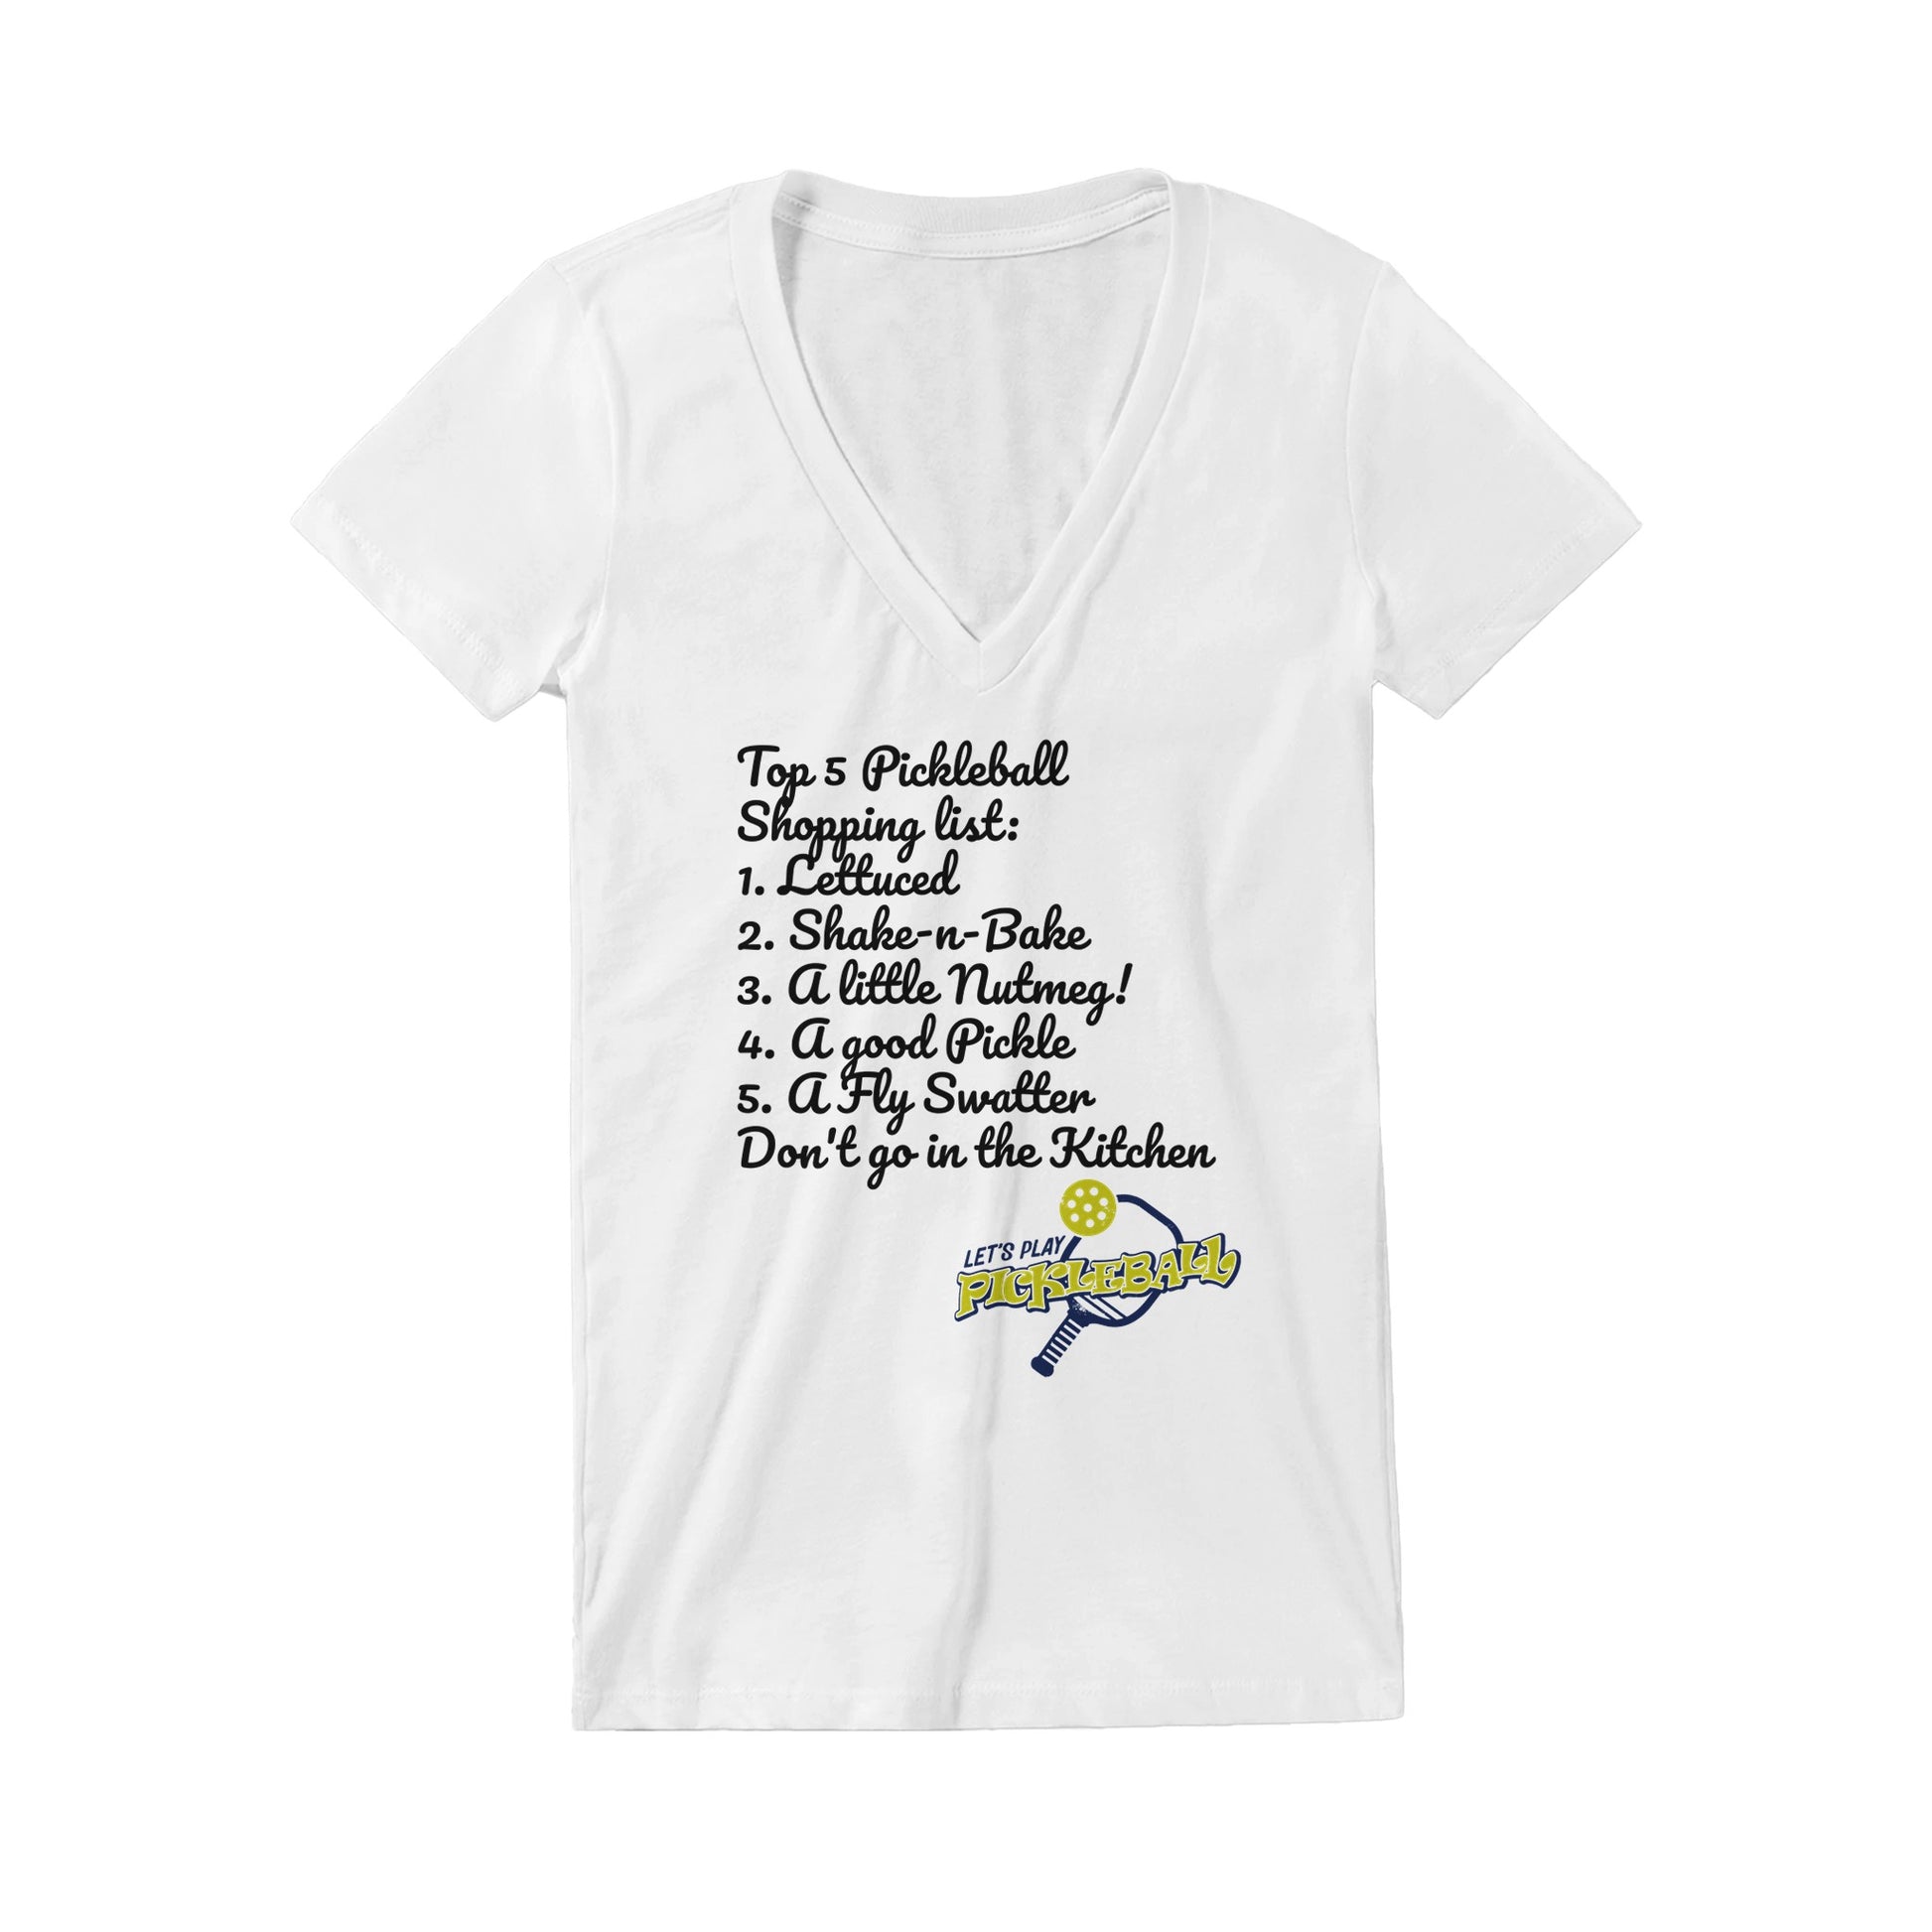  Original motto Top 5 PickleBall list premium women’s V-neck t-shirt from WhatYa Say Apparel made from combed and ring-spun cotton lying flat.